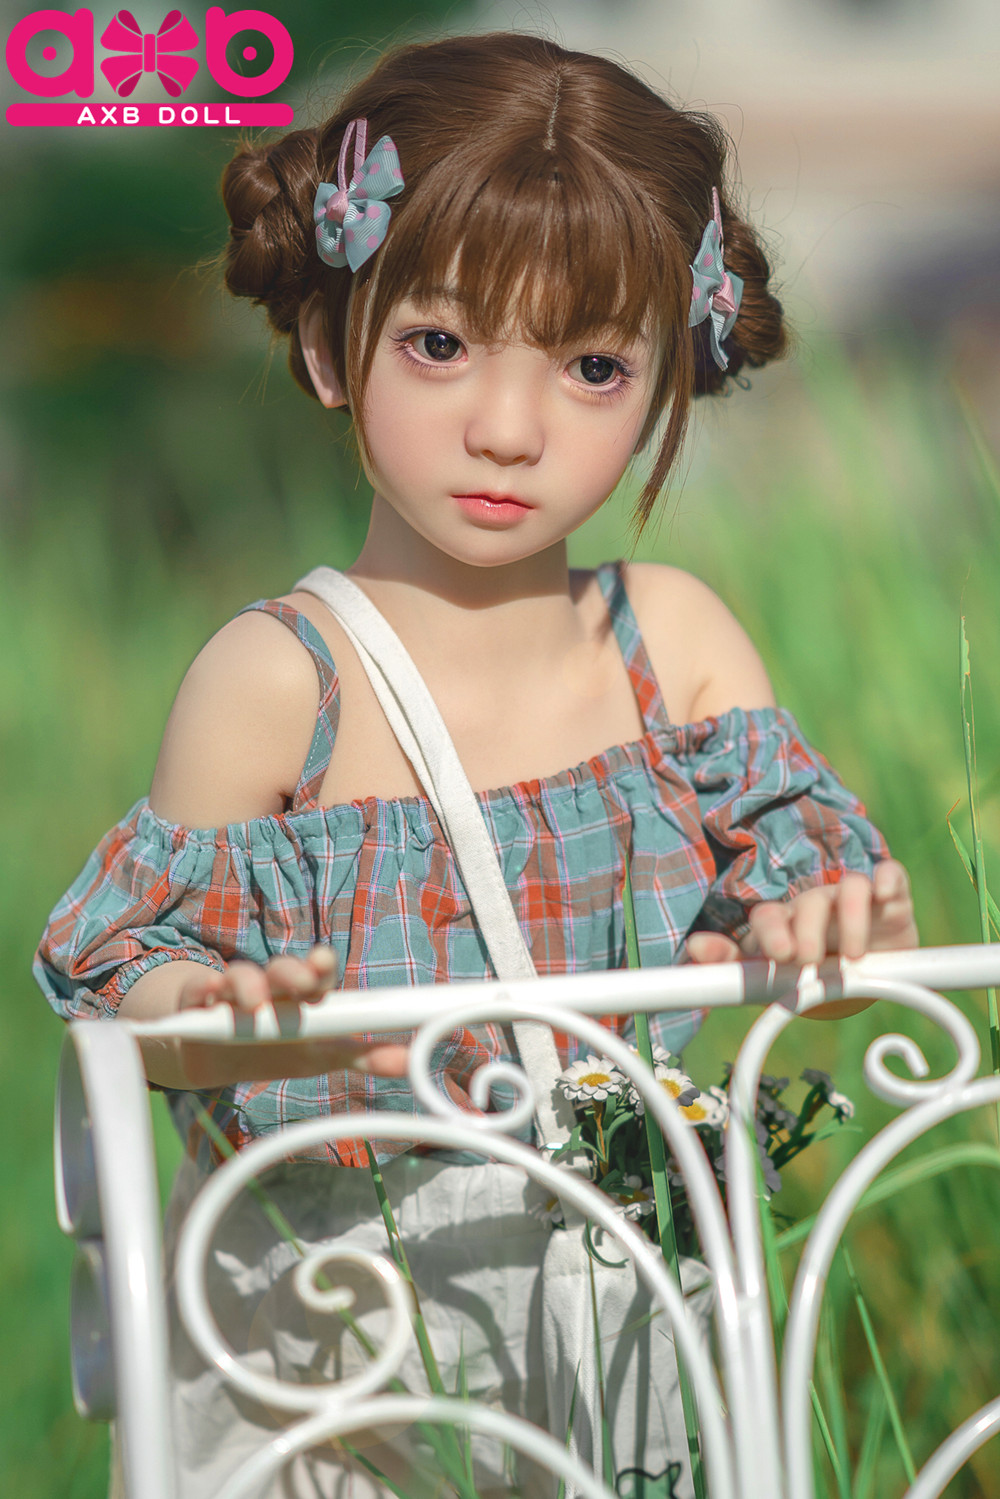 AXBDOLL G03# Super Real Silicone Doll - 画像をクリックして閉じます